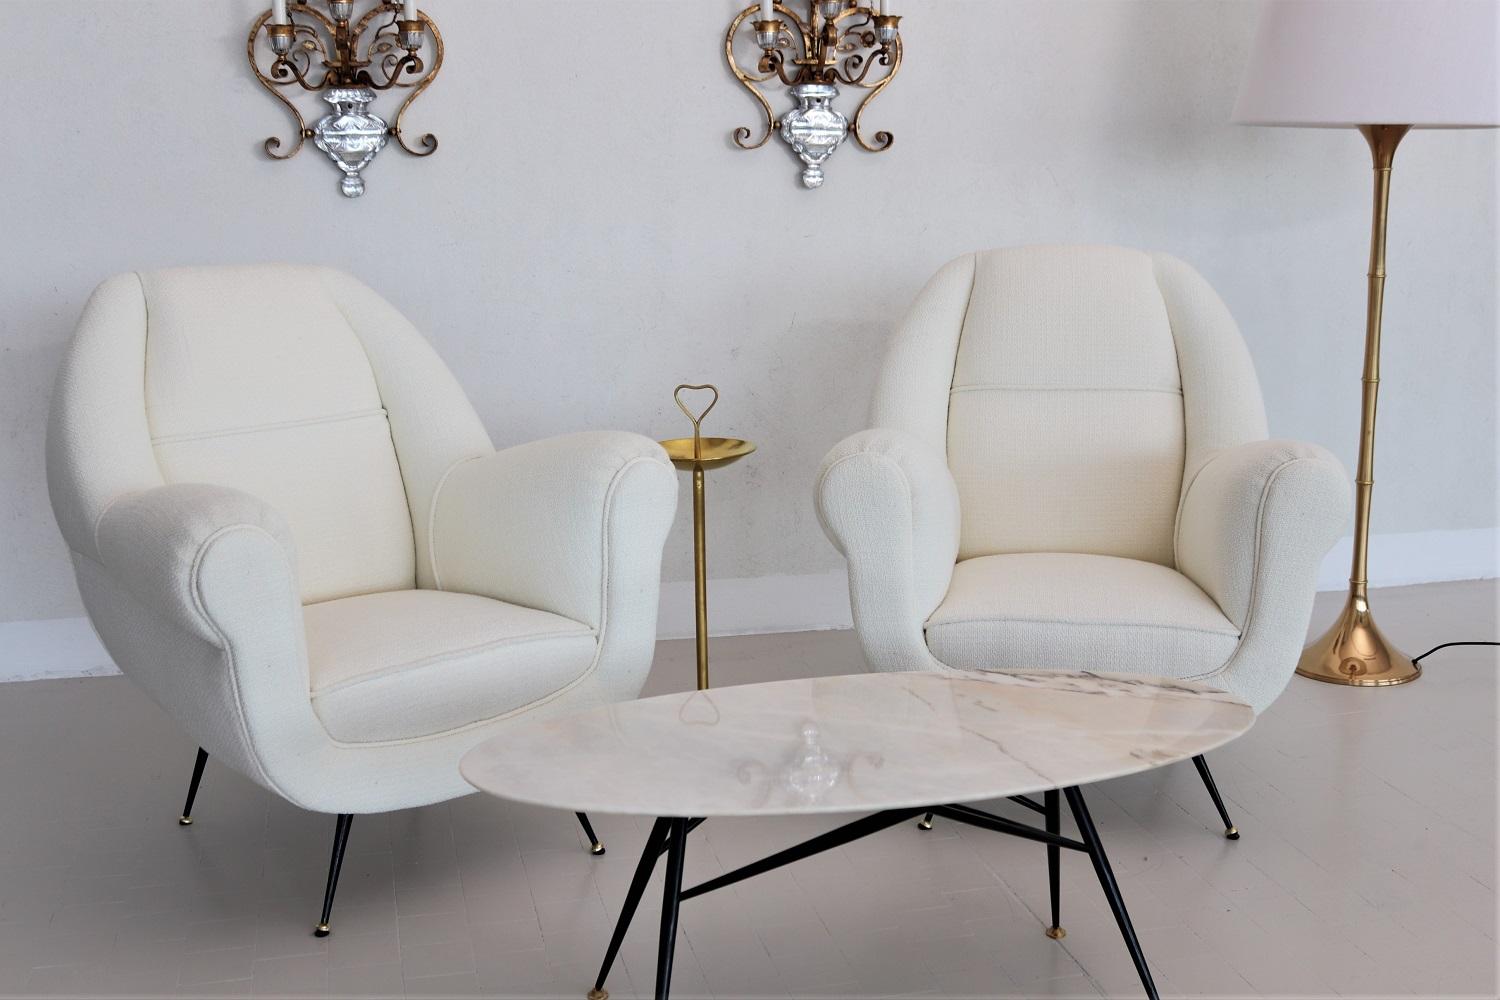 Italian Midcentury Armchairs in White Upholstery and Brass Stiletto Feet, 1960s For Sale 11